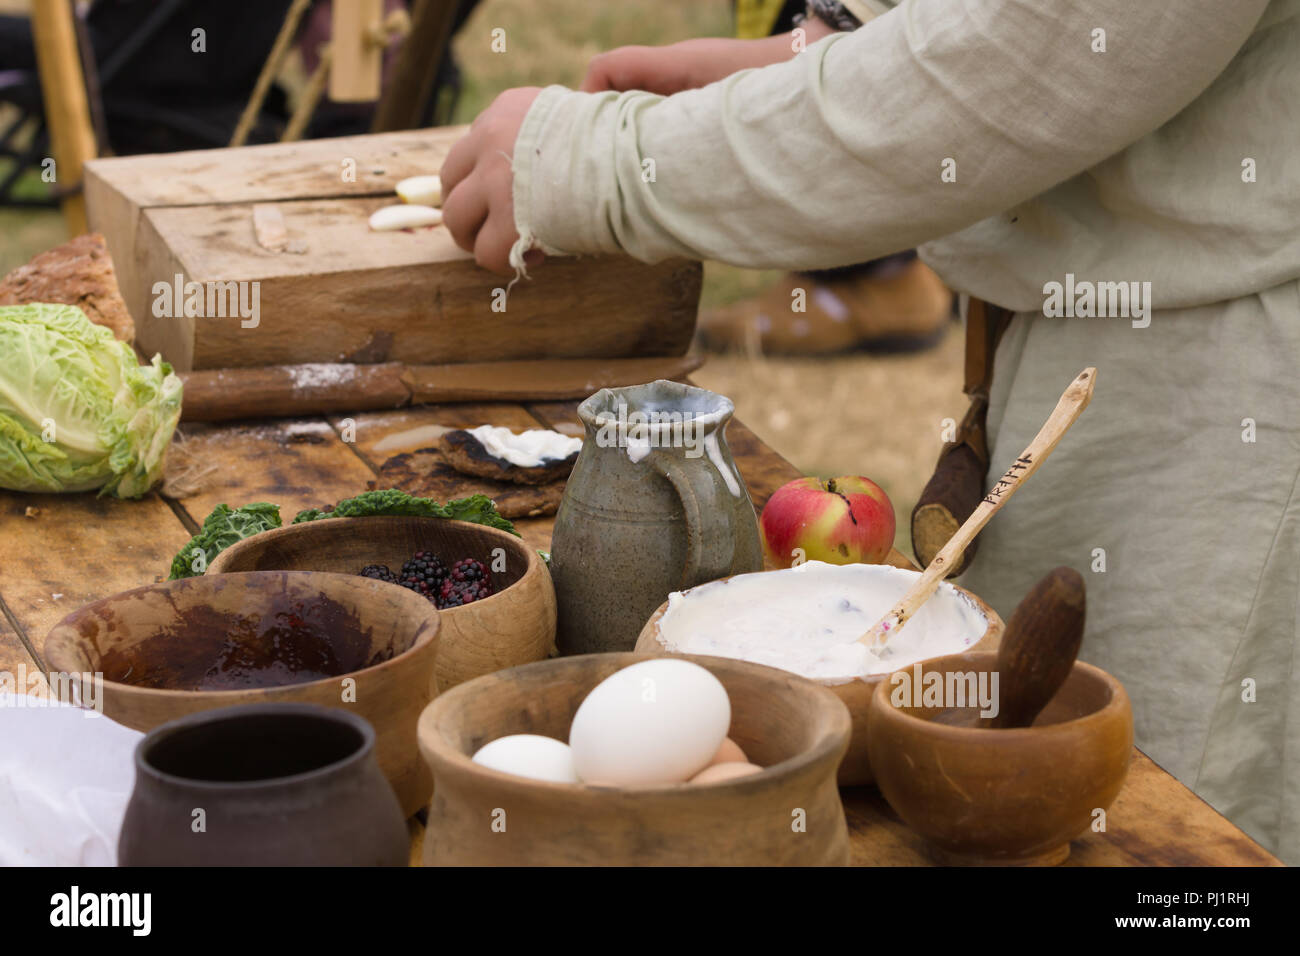 Medieval food preparation including bread, butter, cheese, fruit in wooden bowls or trenchers Stock Photo